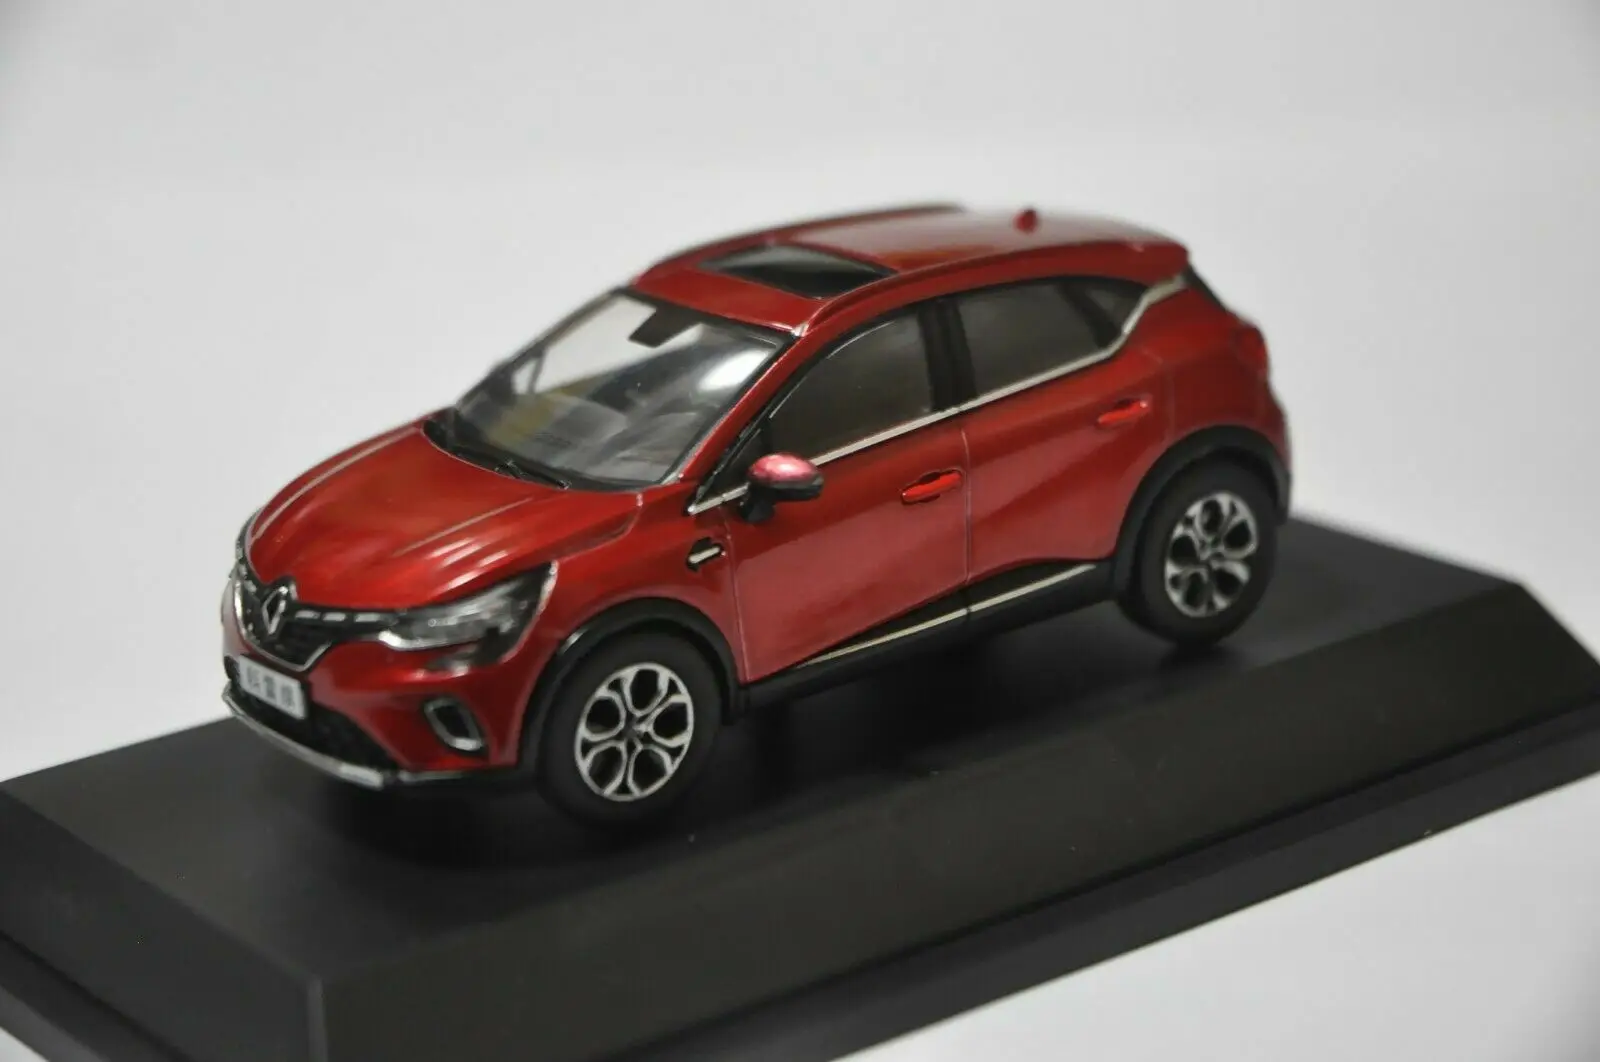 1/43 Scale Renault Captur 2019 Red Diecast Car Model Toy Collection Gift NIB 